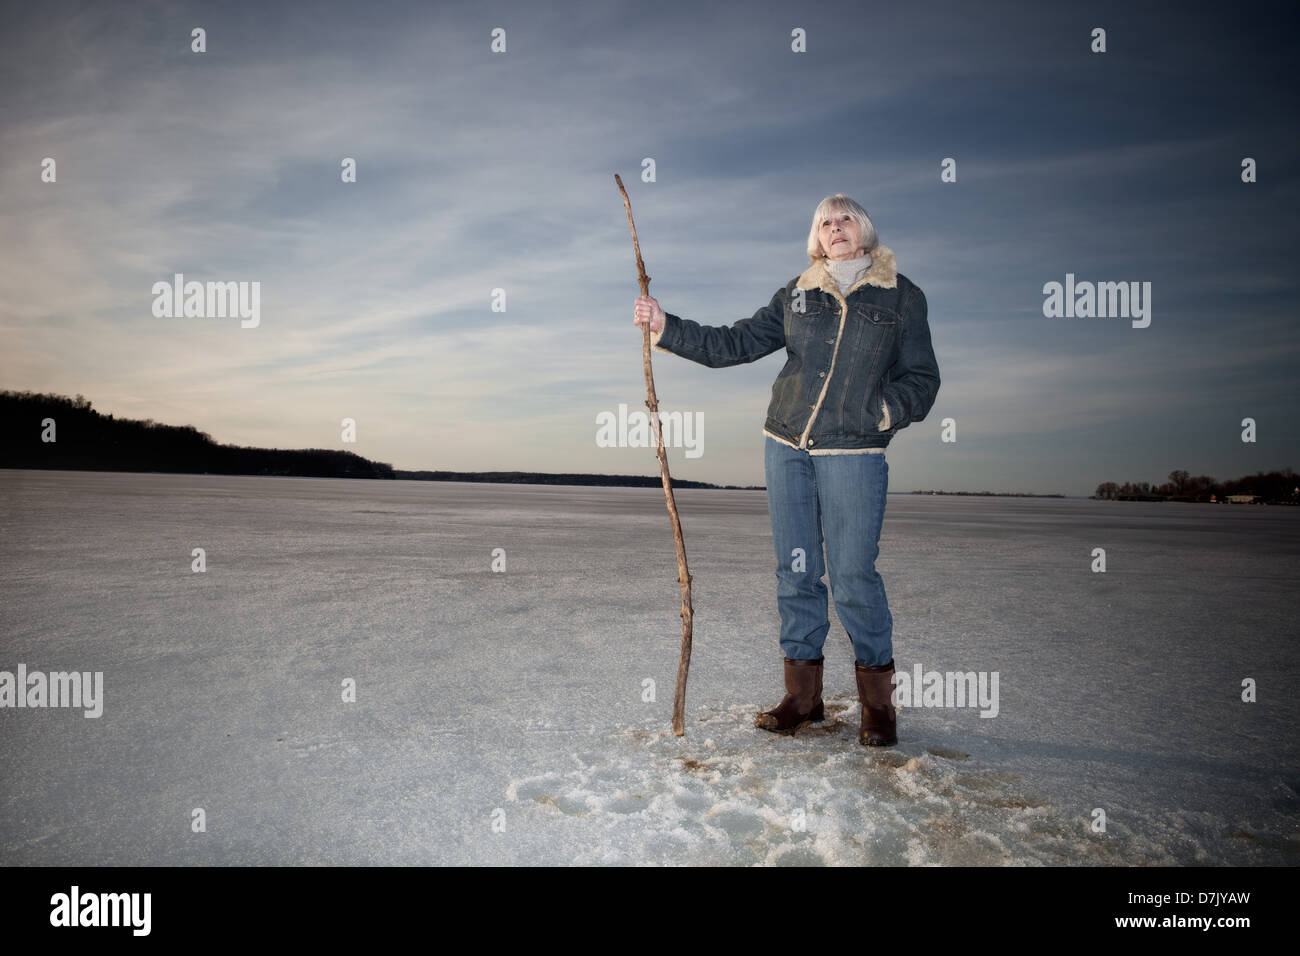 Environmental portrait of woman in her 70's standing on lake holding stick cane Stock Photo